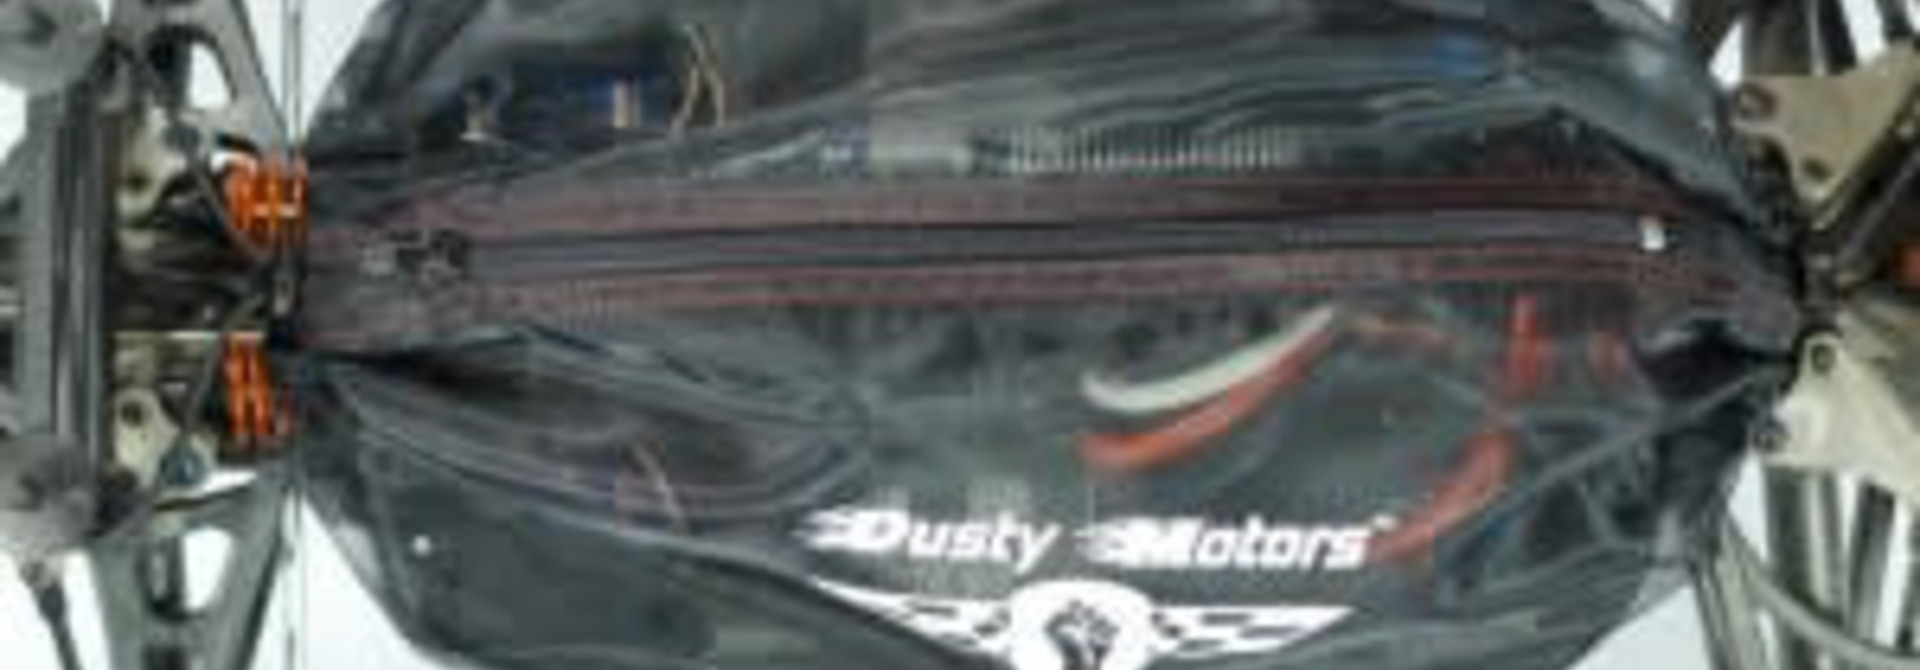 Dusty Motors Protection Cover for Traxxas Slash 2WD LCG chassi Black, DMC0091